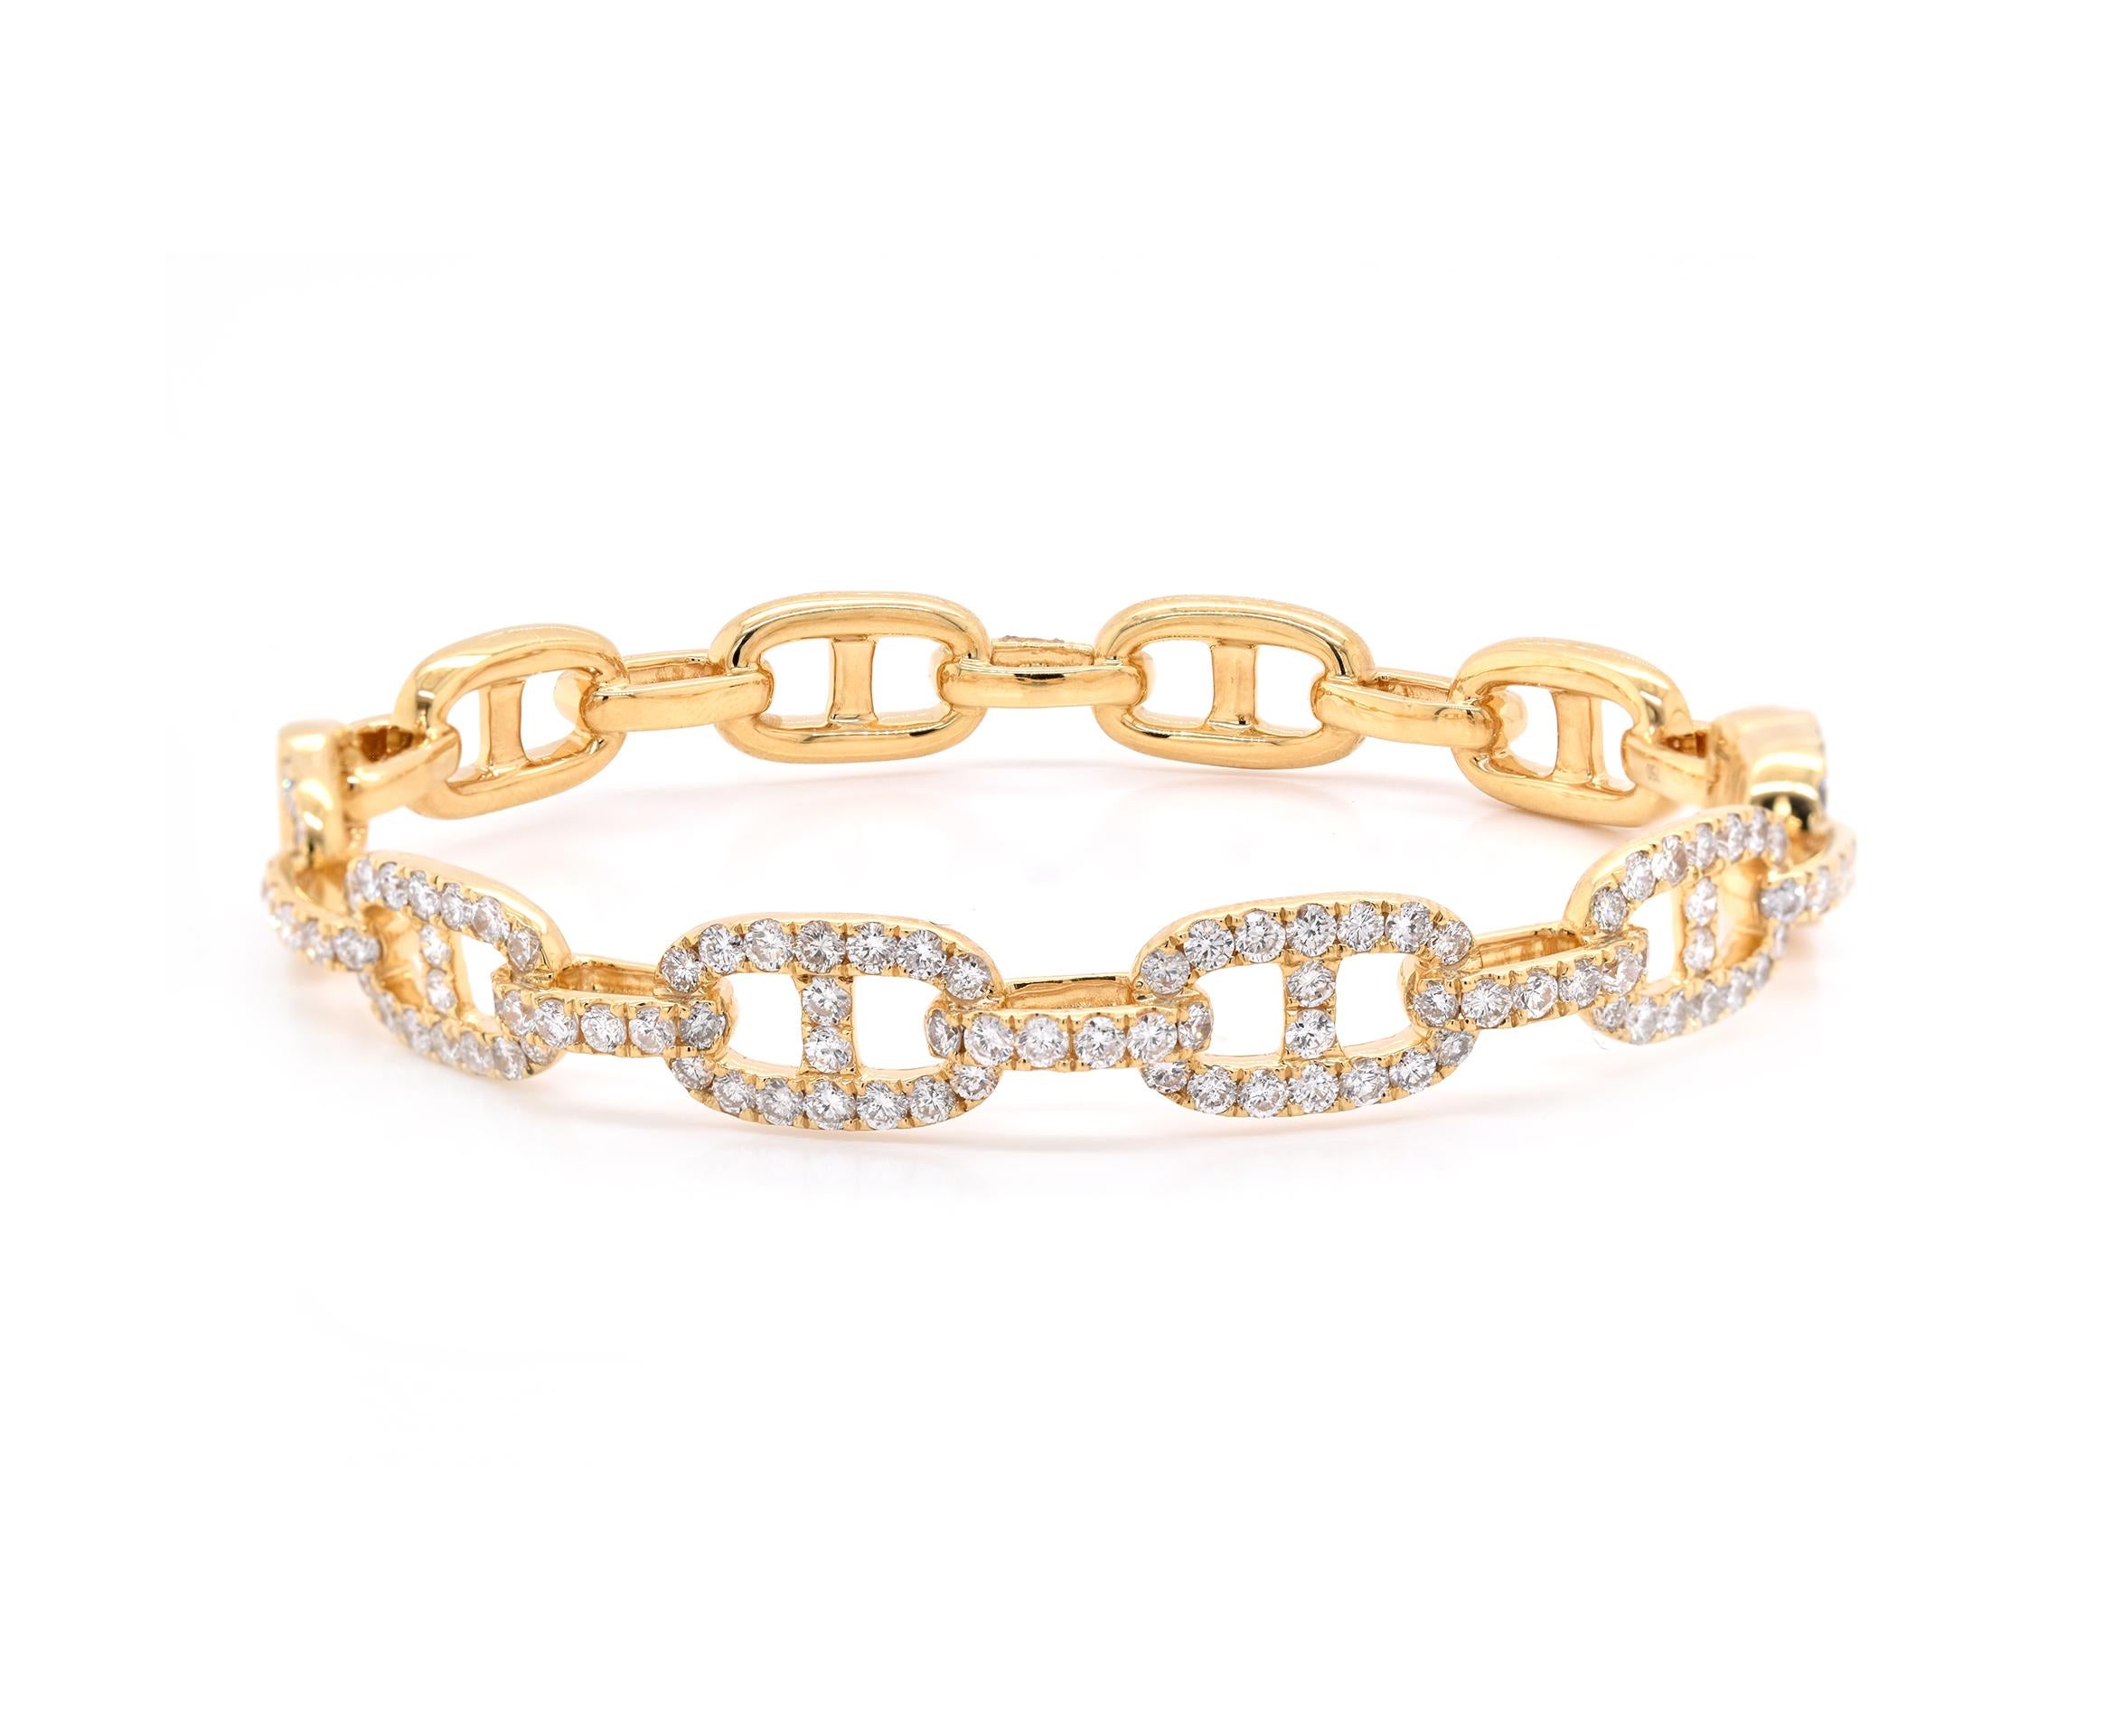 Material: 18K yellow gold
Diamonds:  106 round cut = 3.00cttw
Color: G
Clarity: VS
Dimensions: bracelet will fit up to a 6.5-inch wrist 
Weight: 28.17 grams